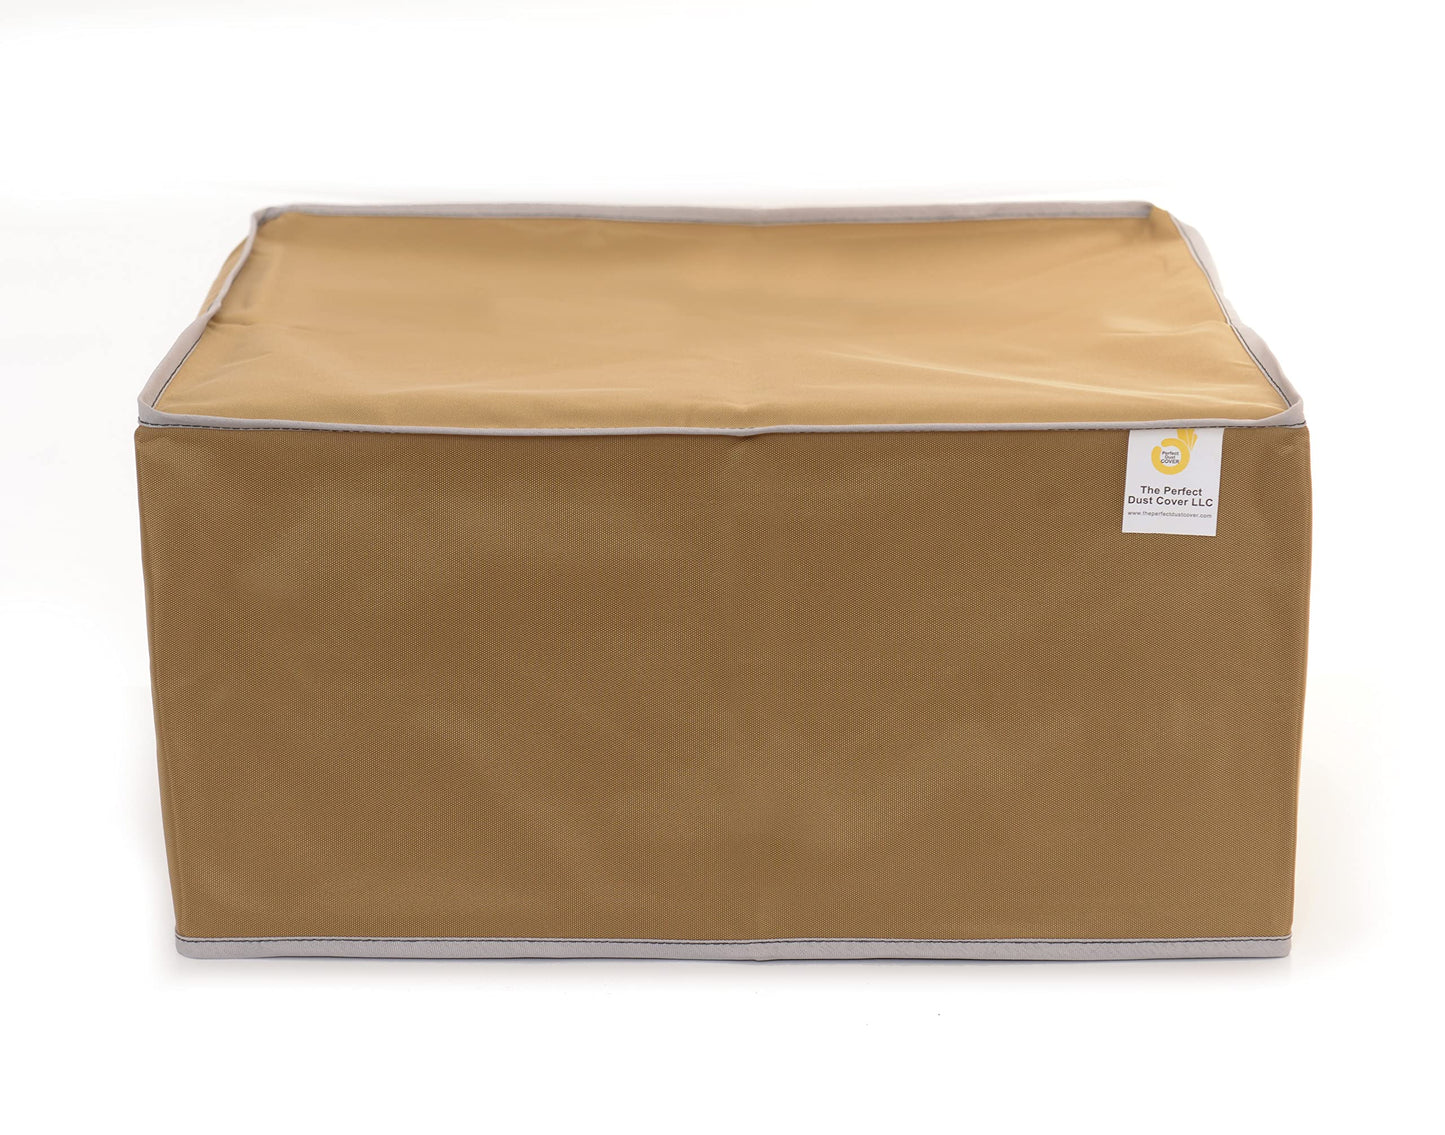 The Perfect Dust Cover, Tan Nylon Cover for HP OfficeJet 7610 Wide Format e-All-in-One Printer, Anti Static Waterproof Cover, Dimensions 24.29''W x 19.89''D x 11.69''H by The Perfect Dust Cover LLC